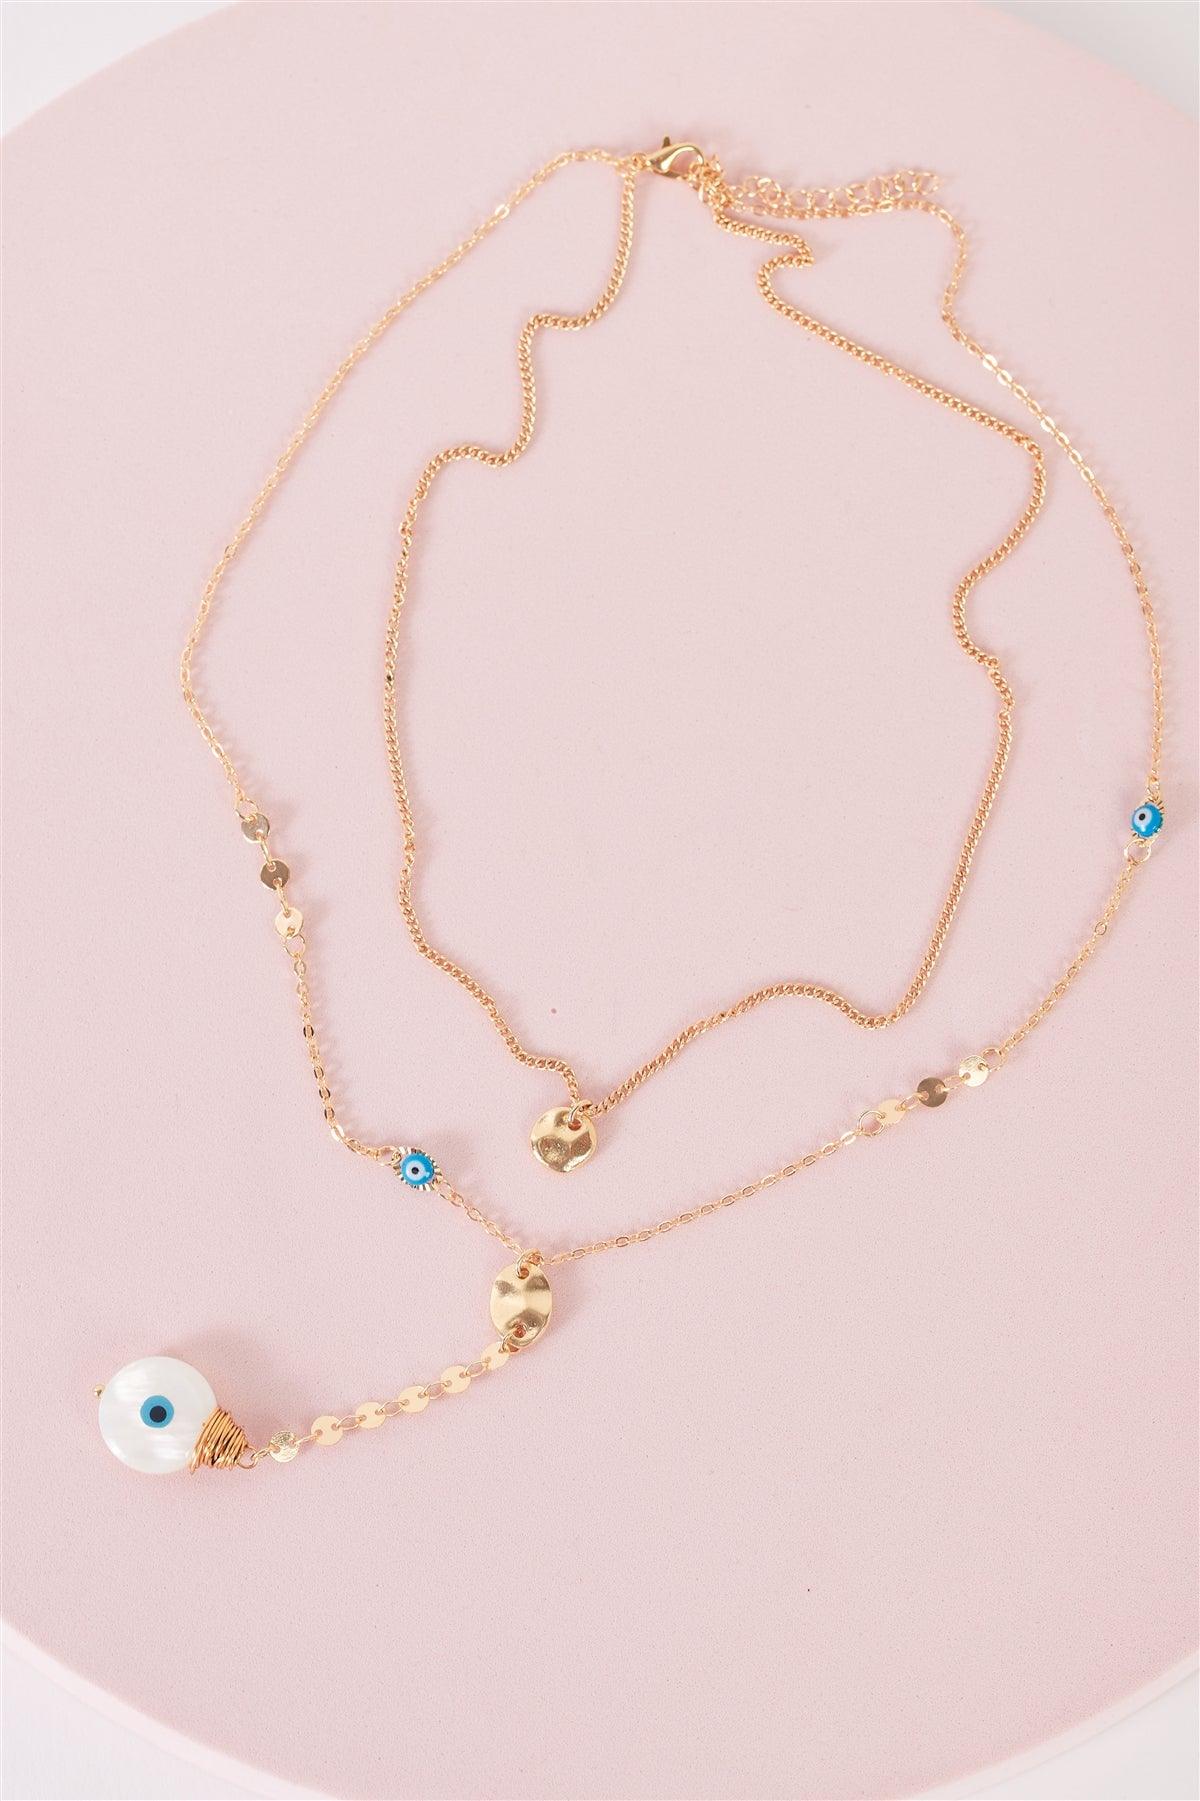 "Nazar Evil Eye" Gold & Blue Double With Circle Pendants Belcher And Choker Chains Necklace /3 Pieces